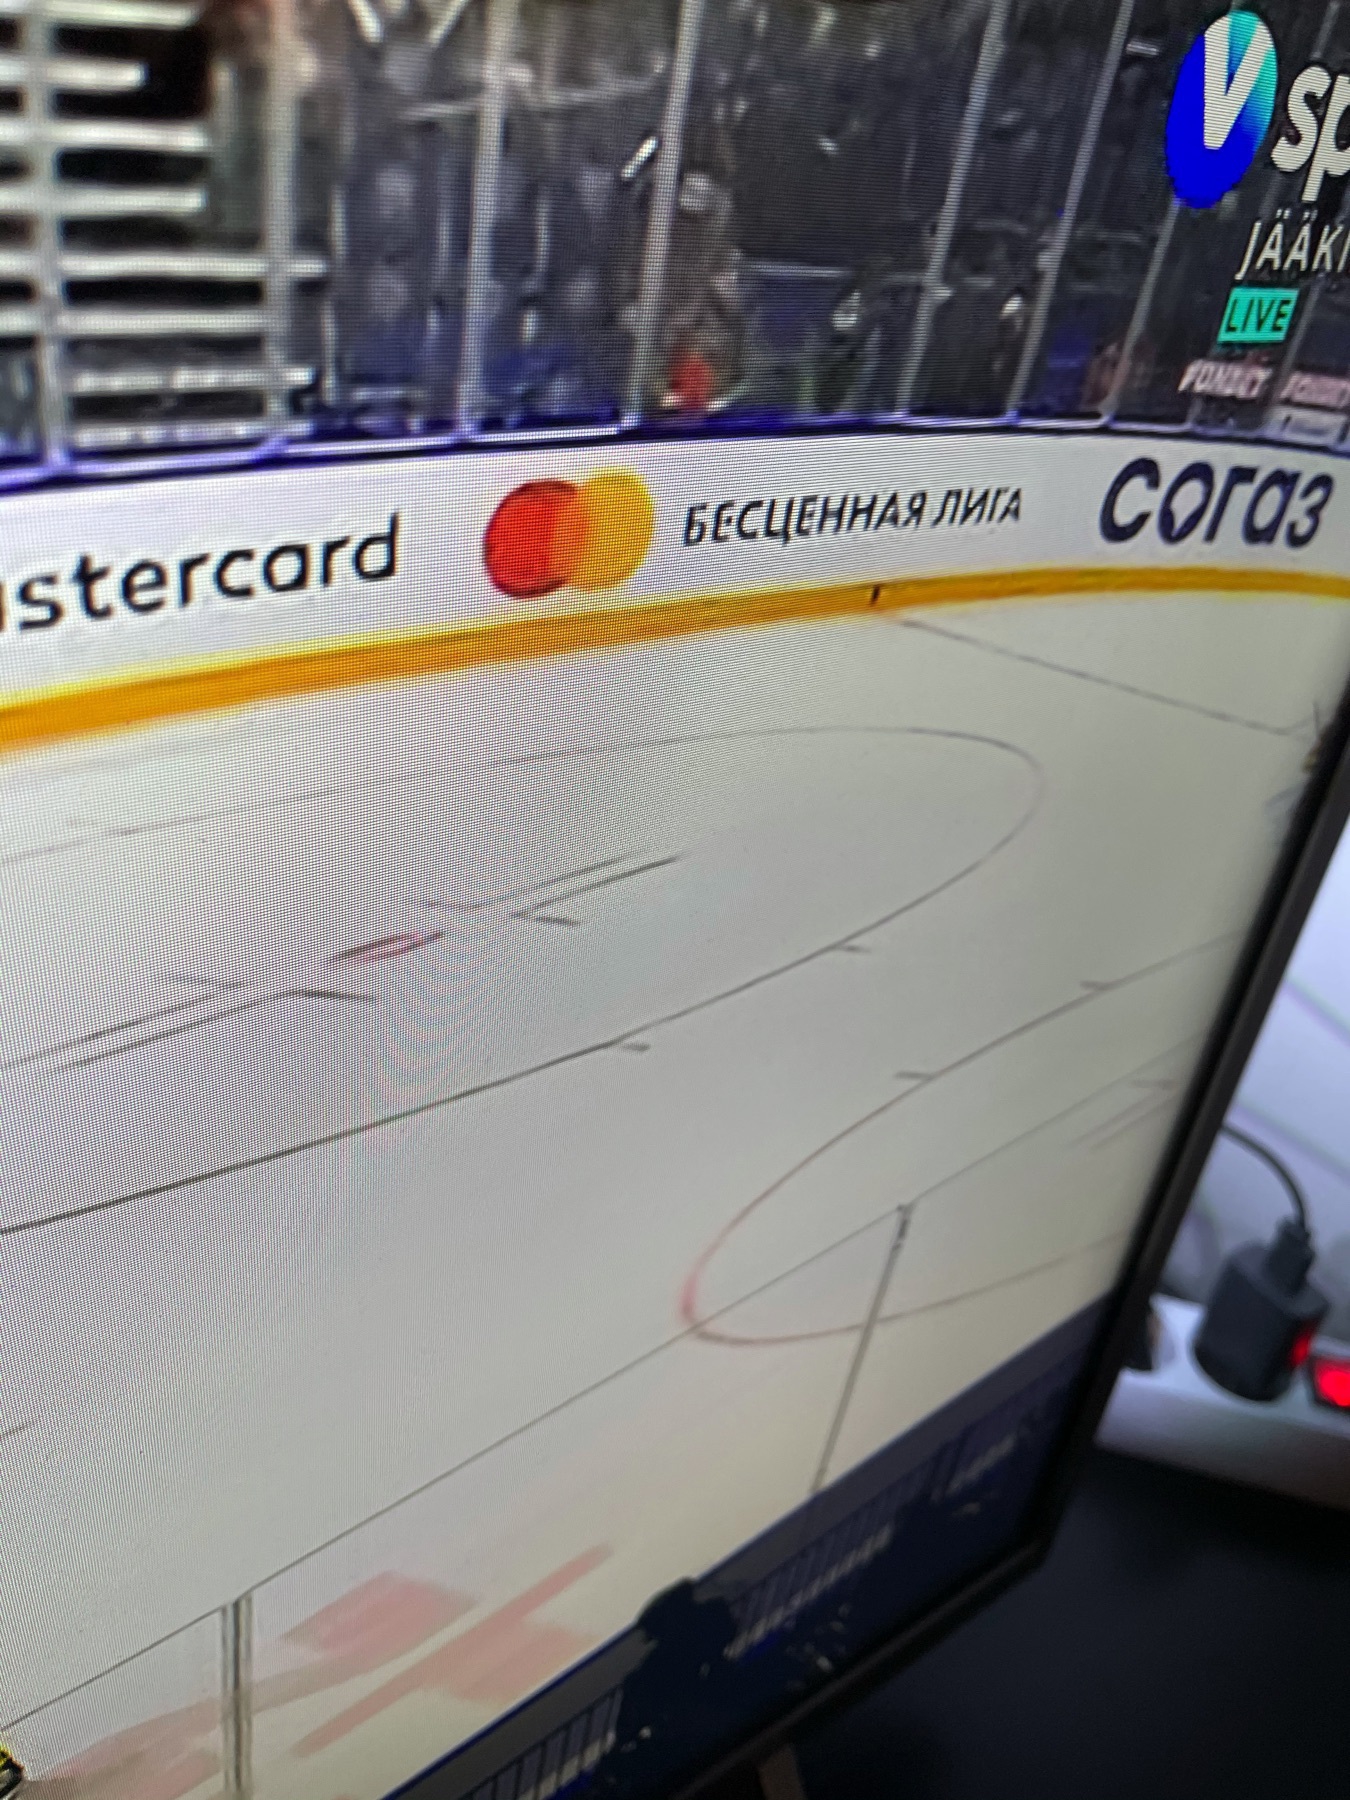 mastercard ad on the side of a hockey rink saying “priceless league” in Russian 